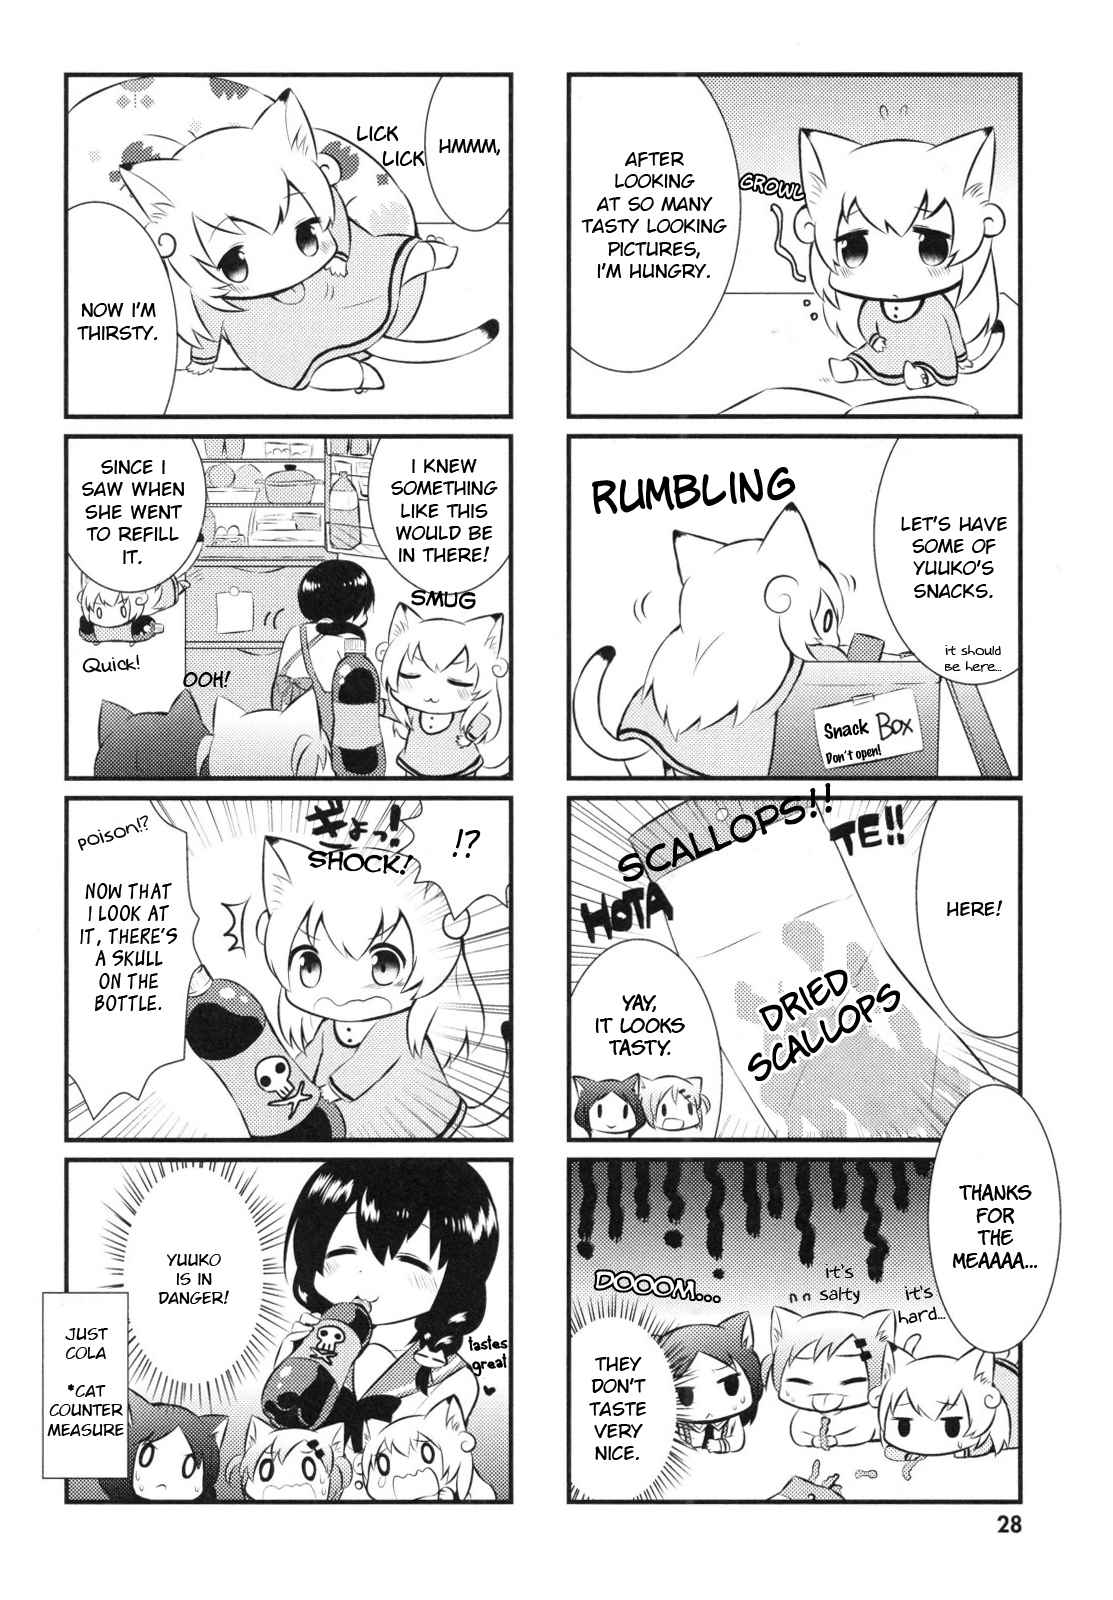 Nyanko Days Vol. 1 Ch. 3 The Cats House Sitting